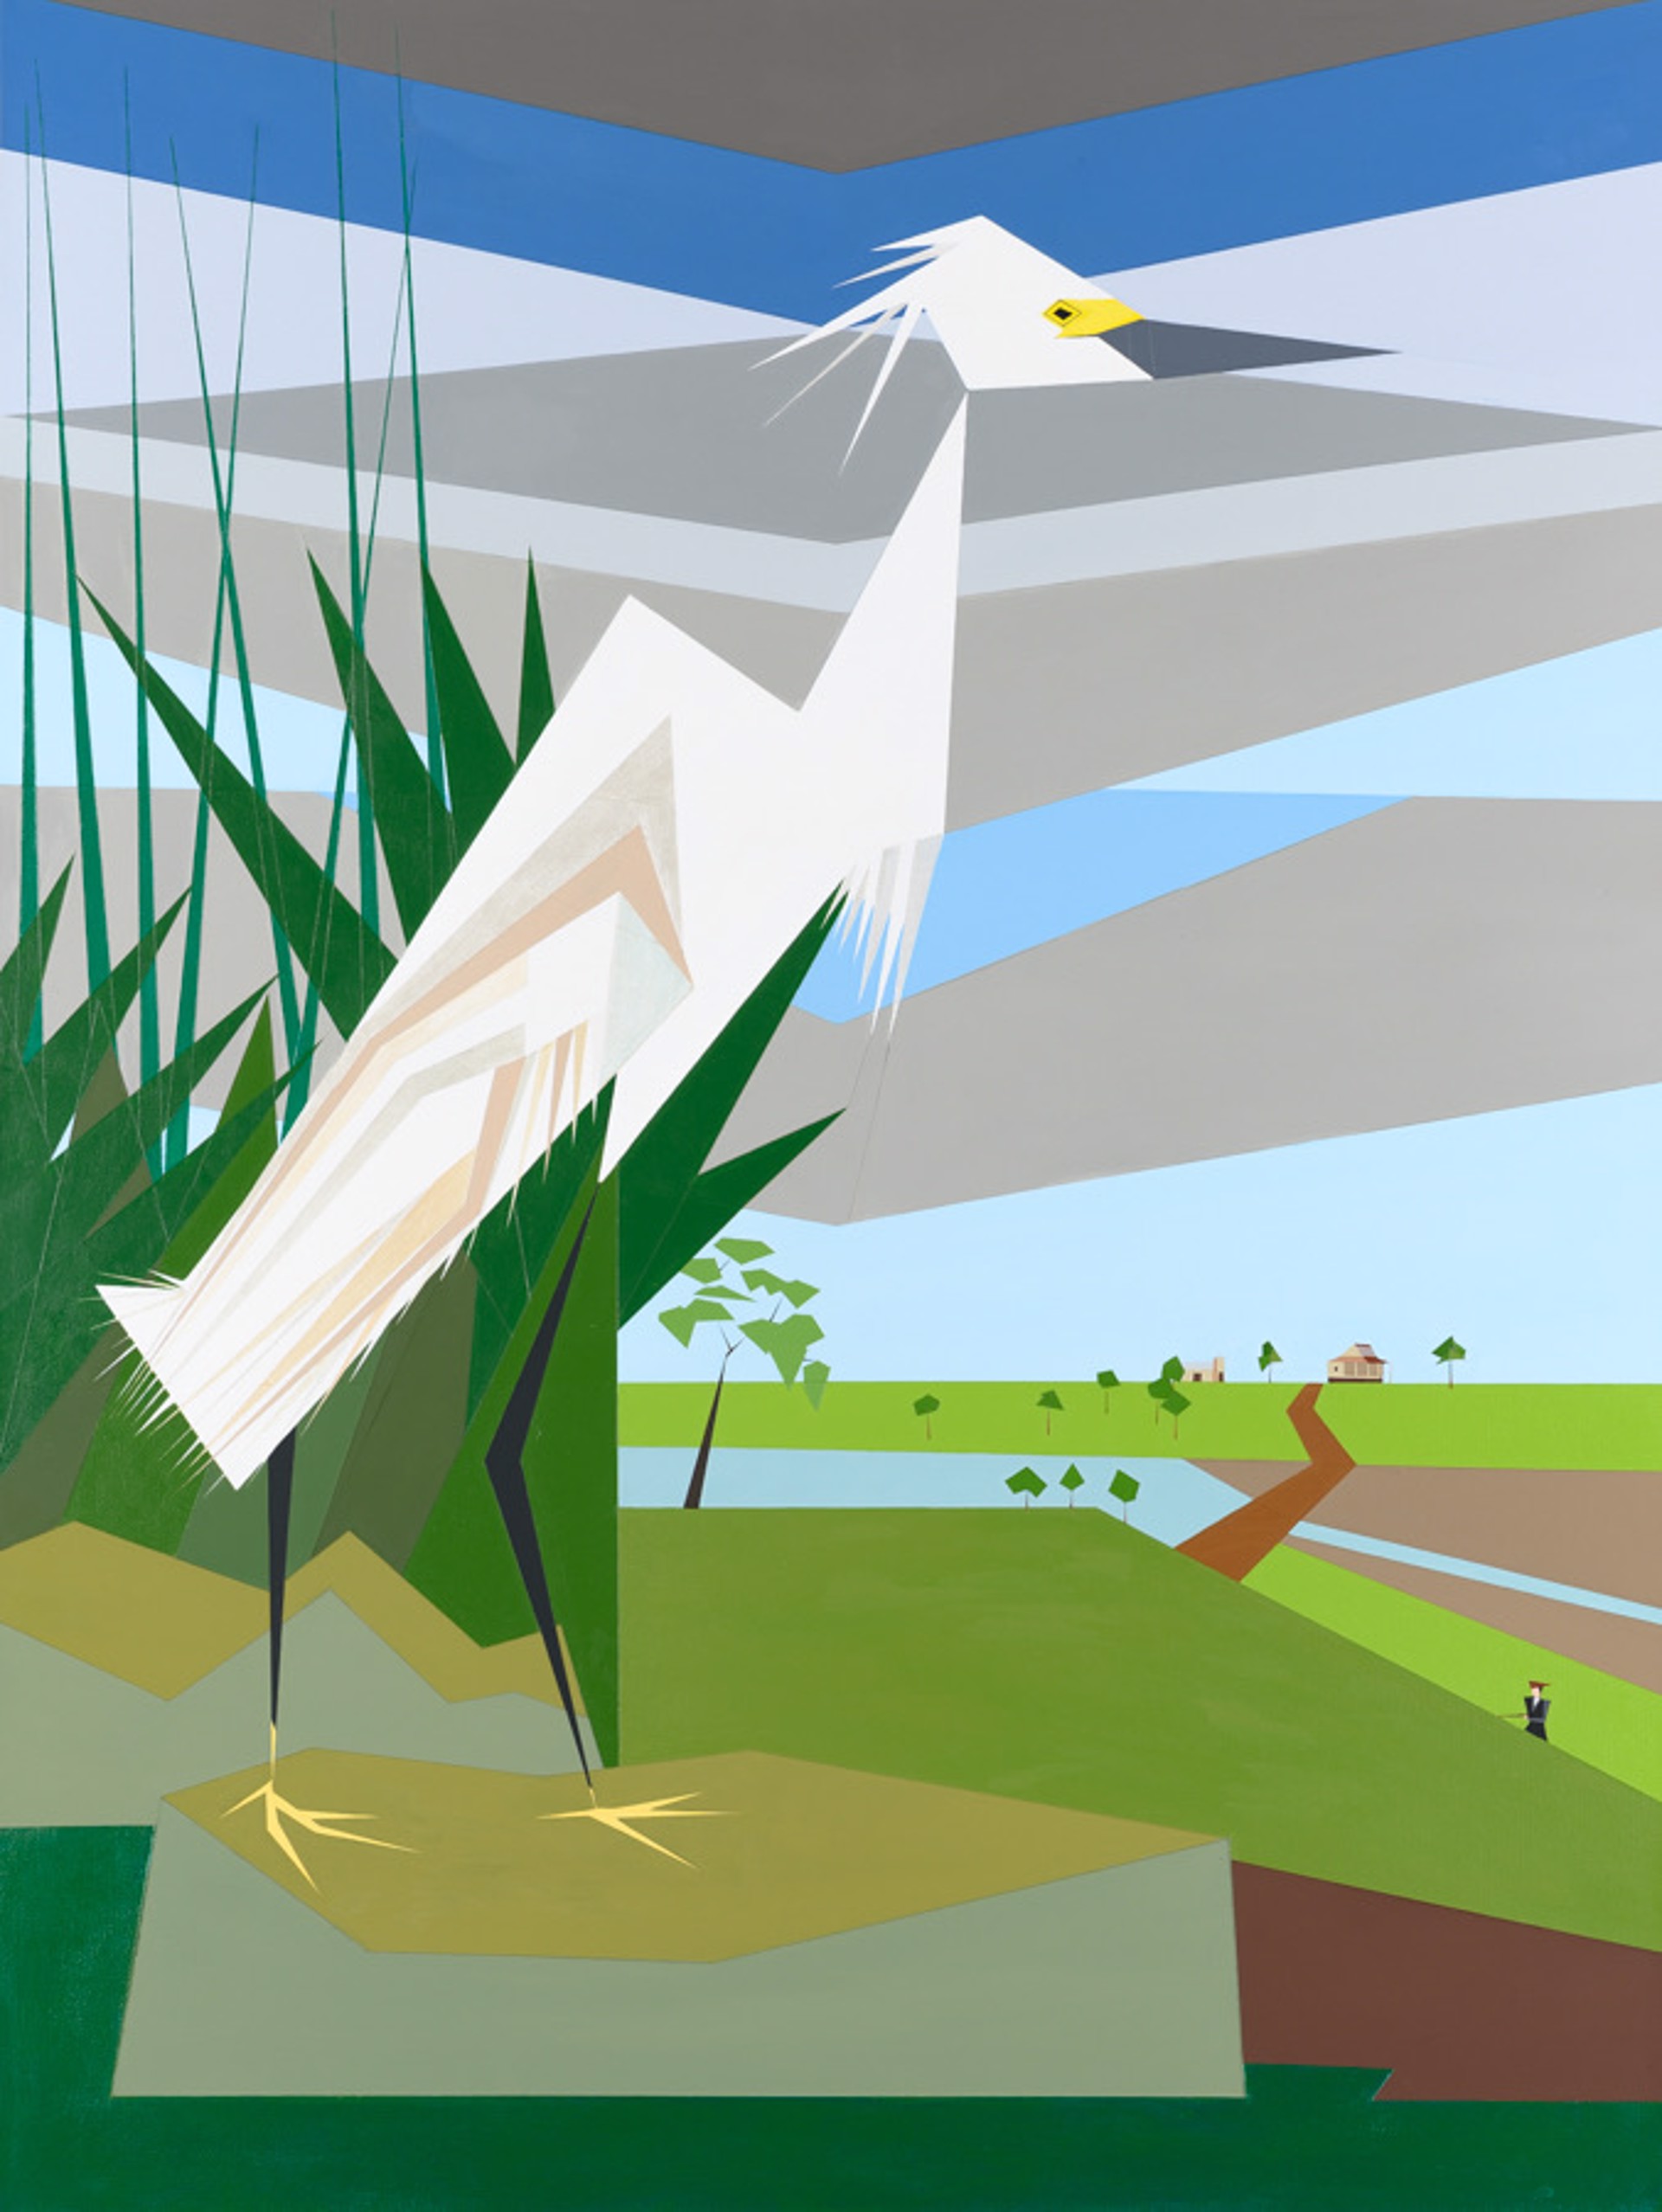 Snowy Egret by Millie Sims